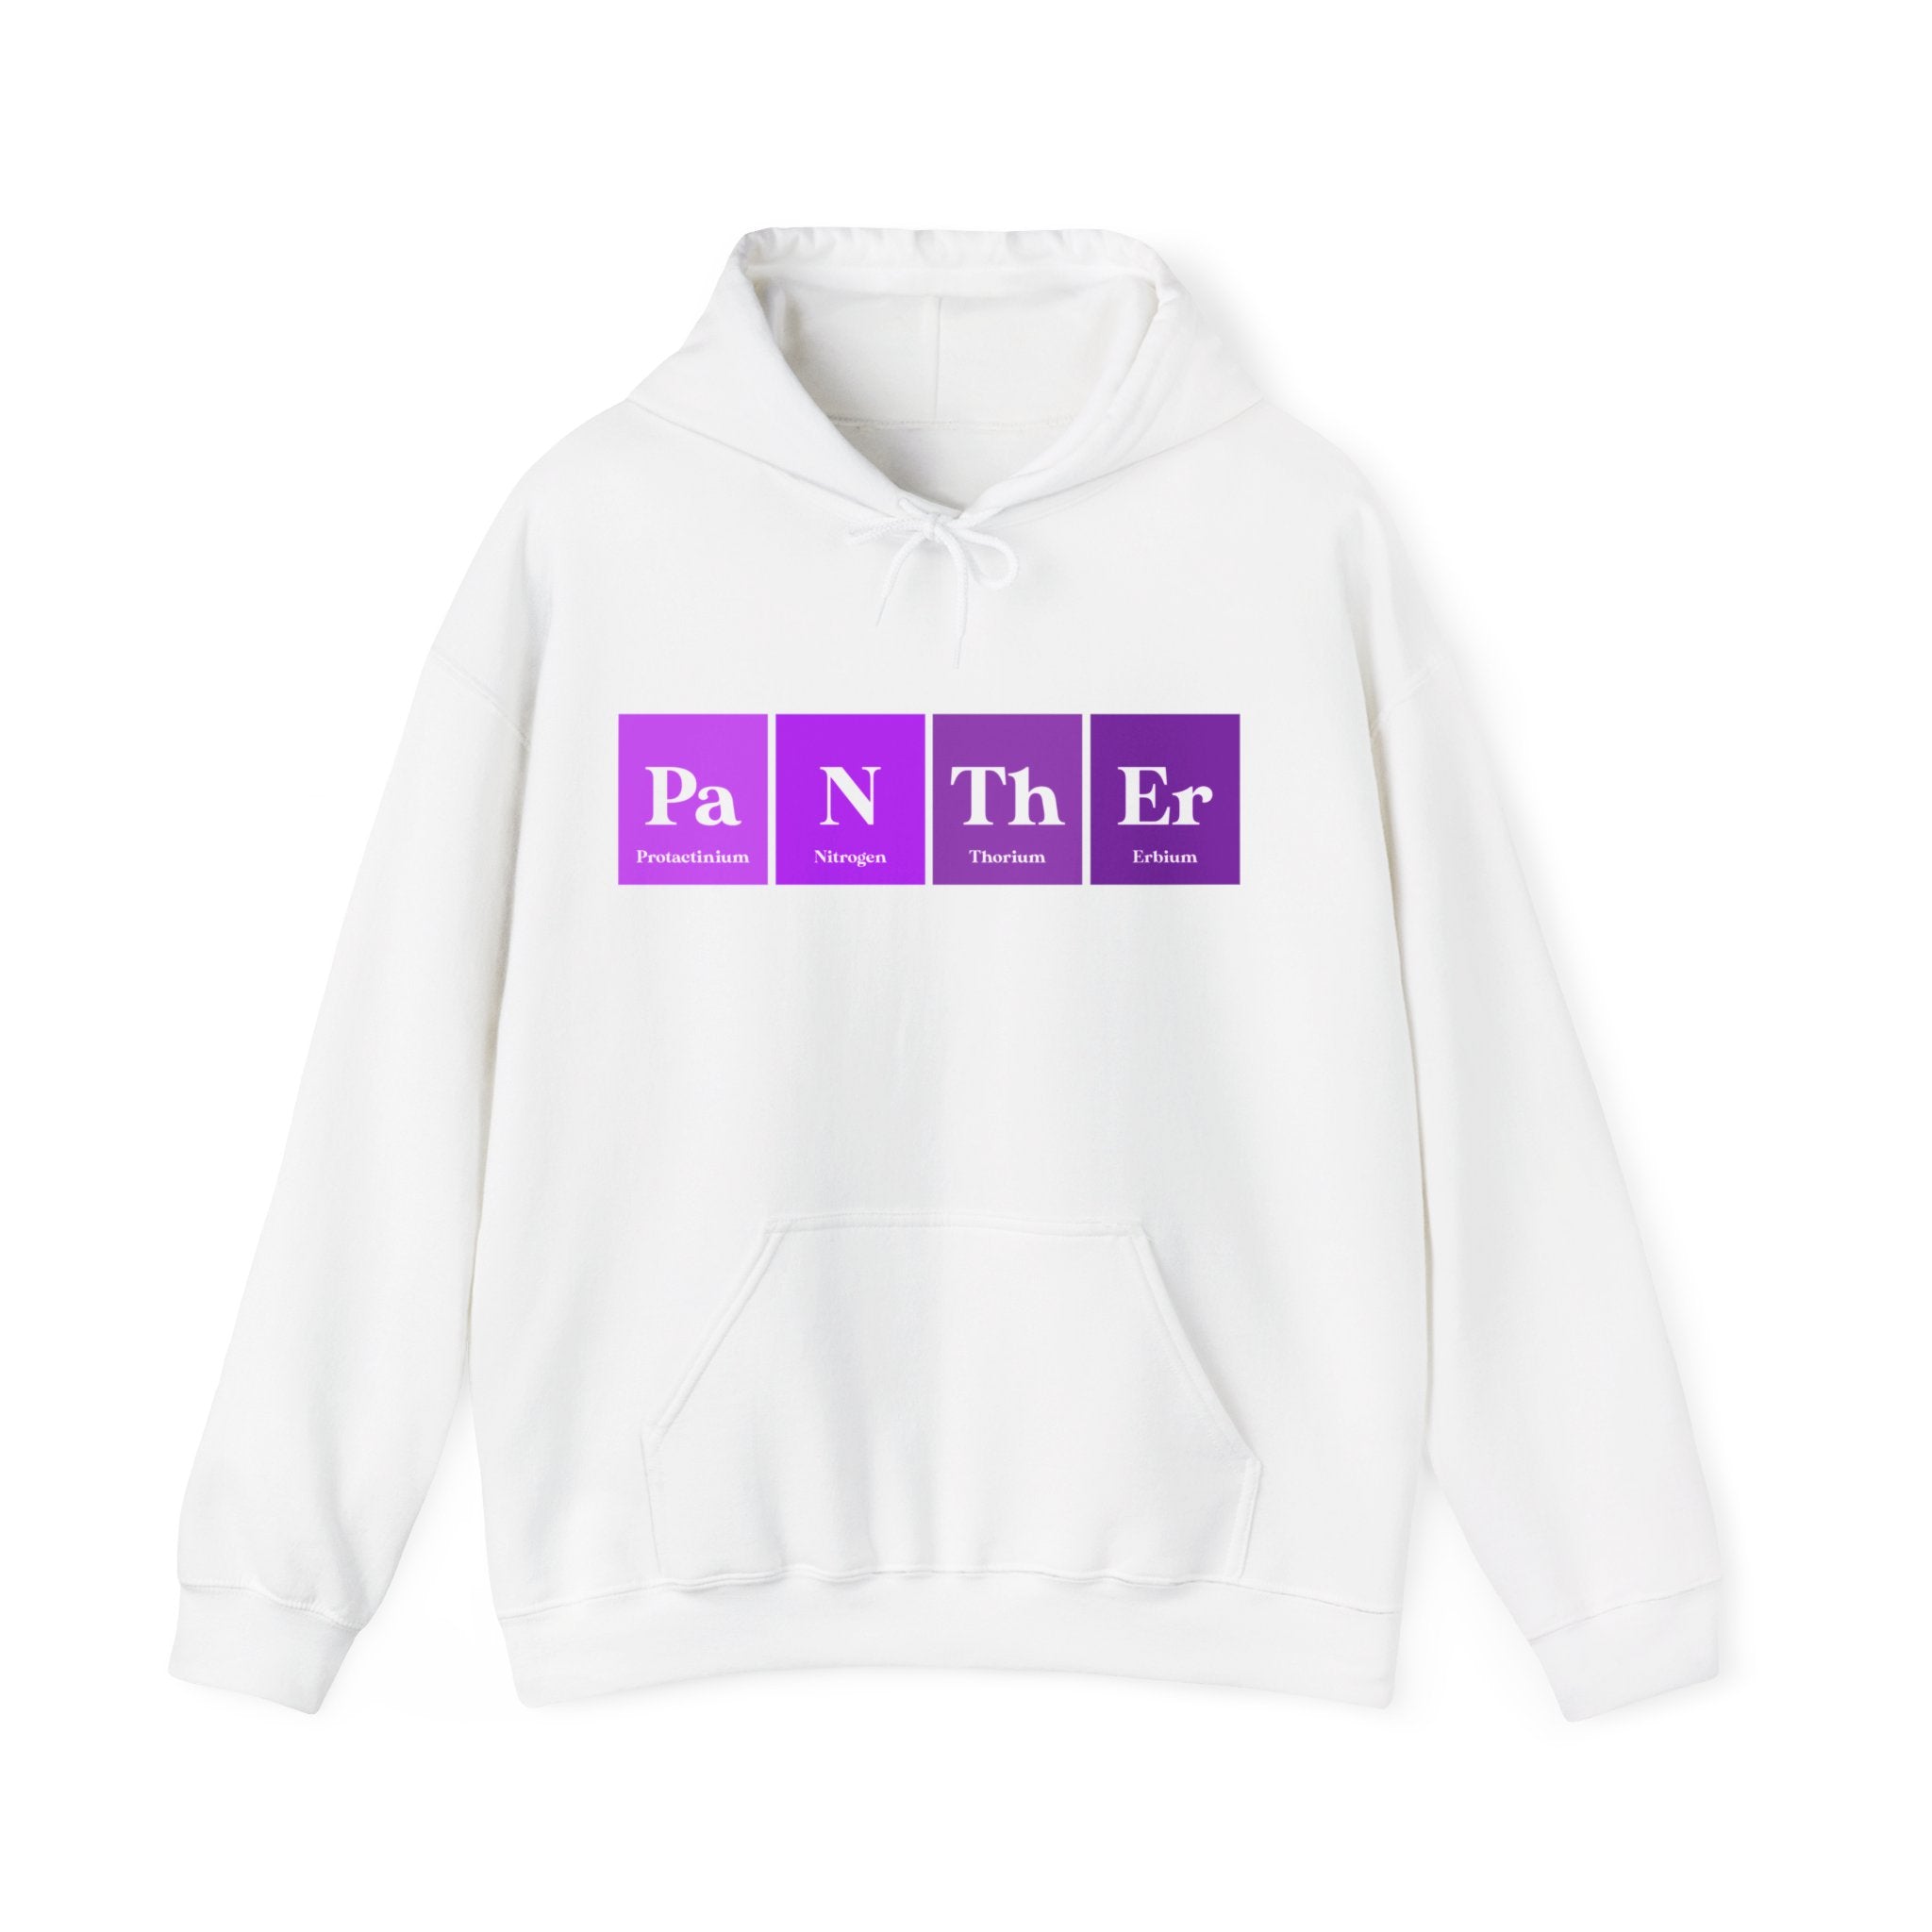 A Pa-N-Th-Er - Hooded Sweatshirt featuring the word "Panther" in a striking Pa-N-Th-Er design, with purple blocks resembling elements from the periodic table.